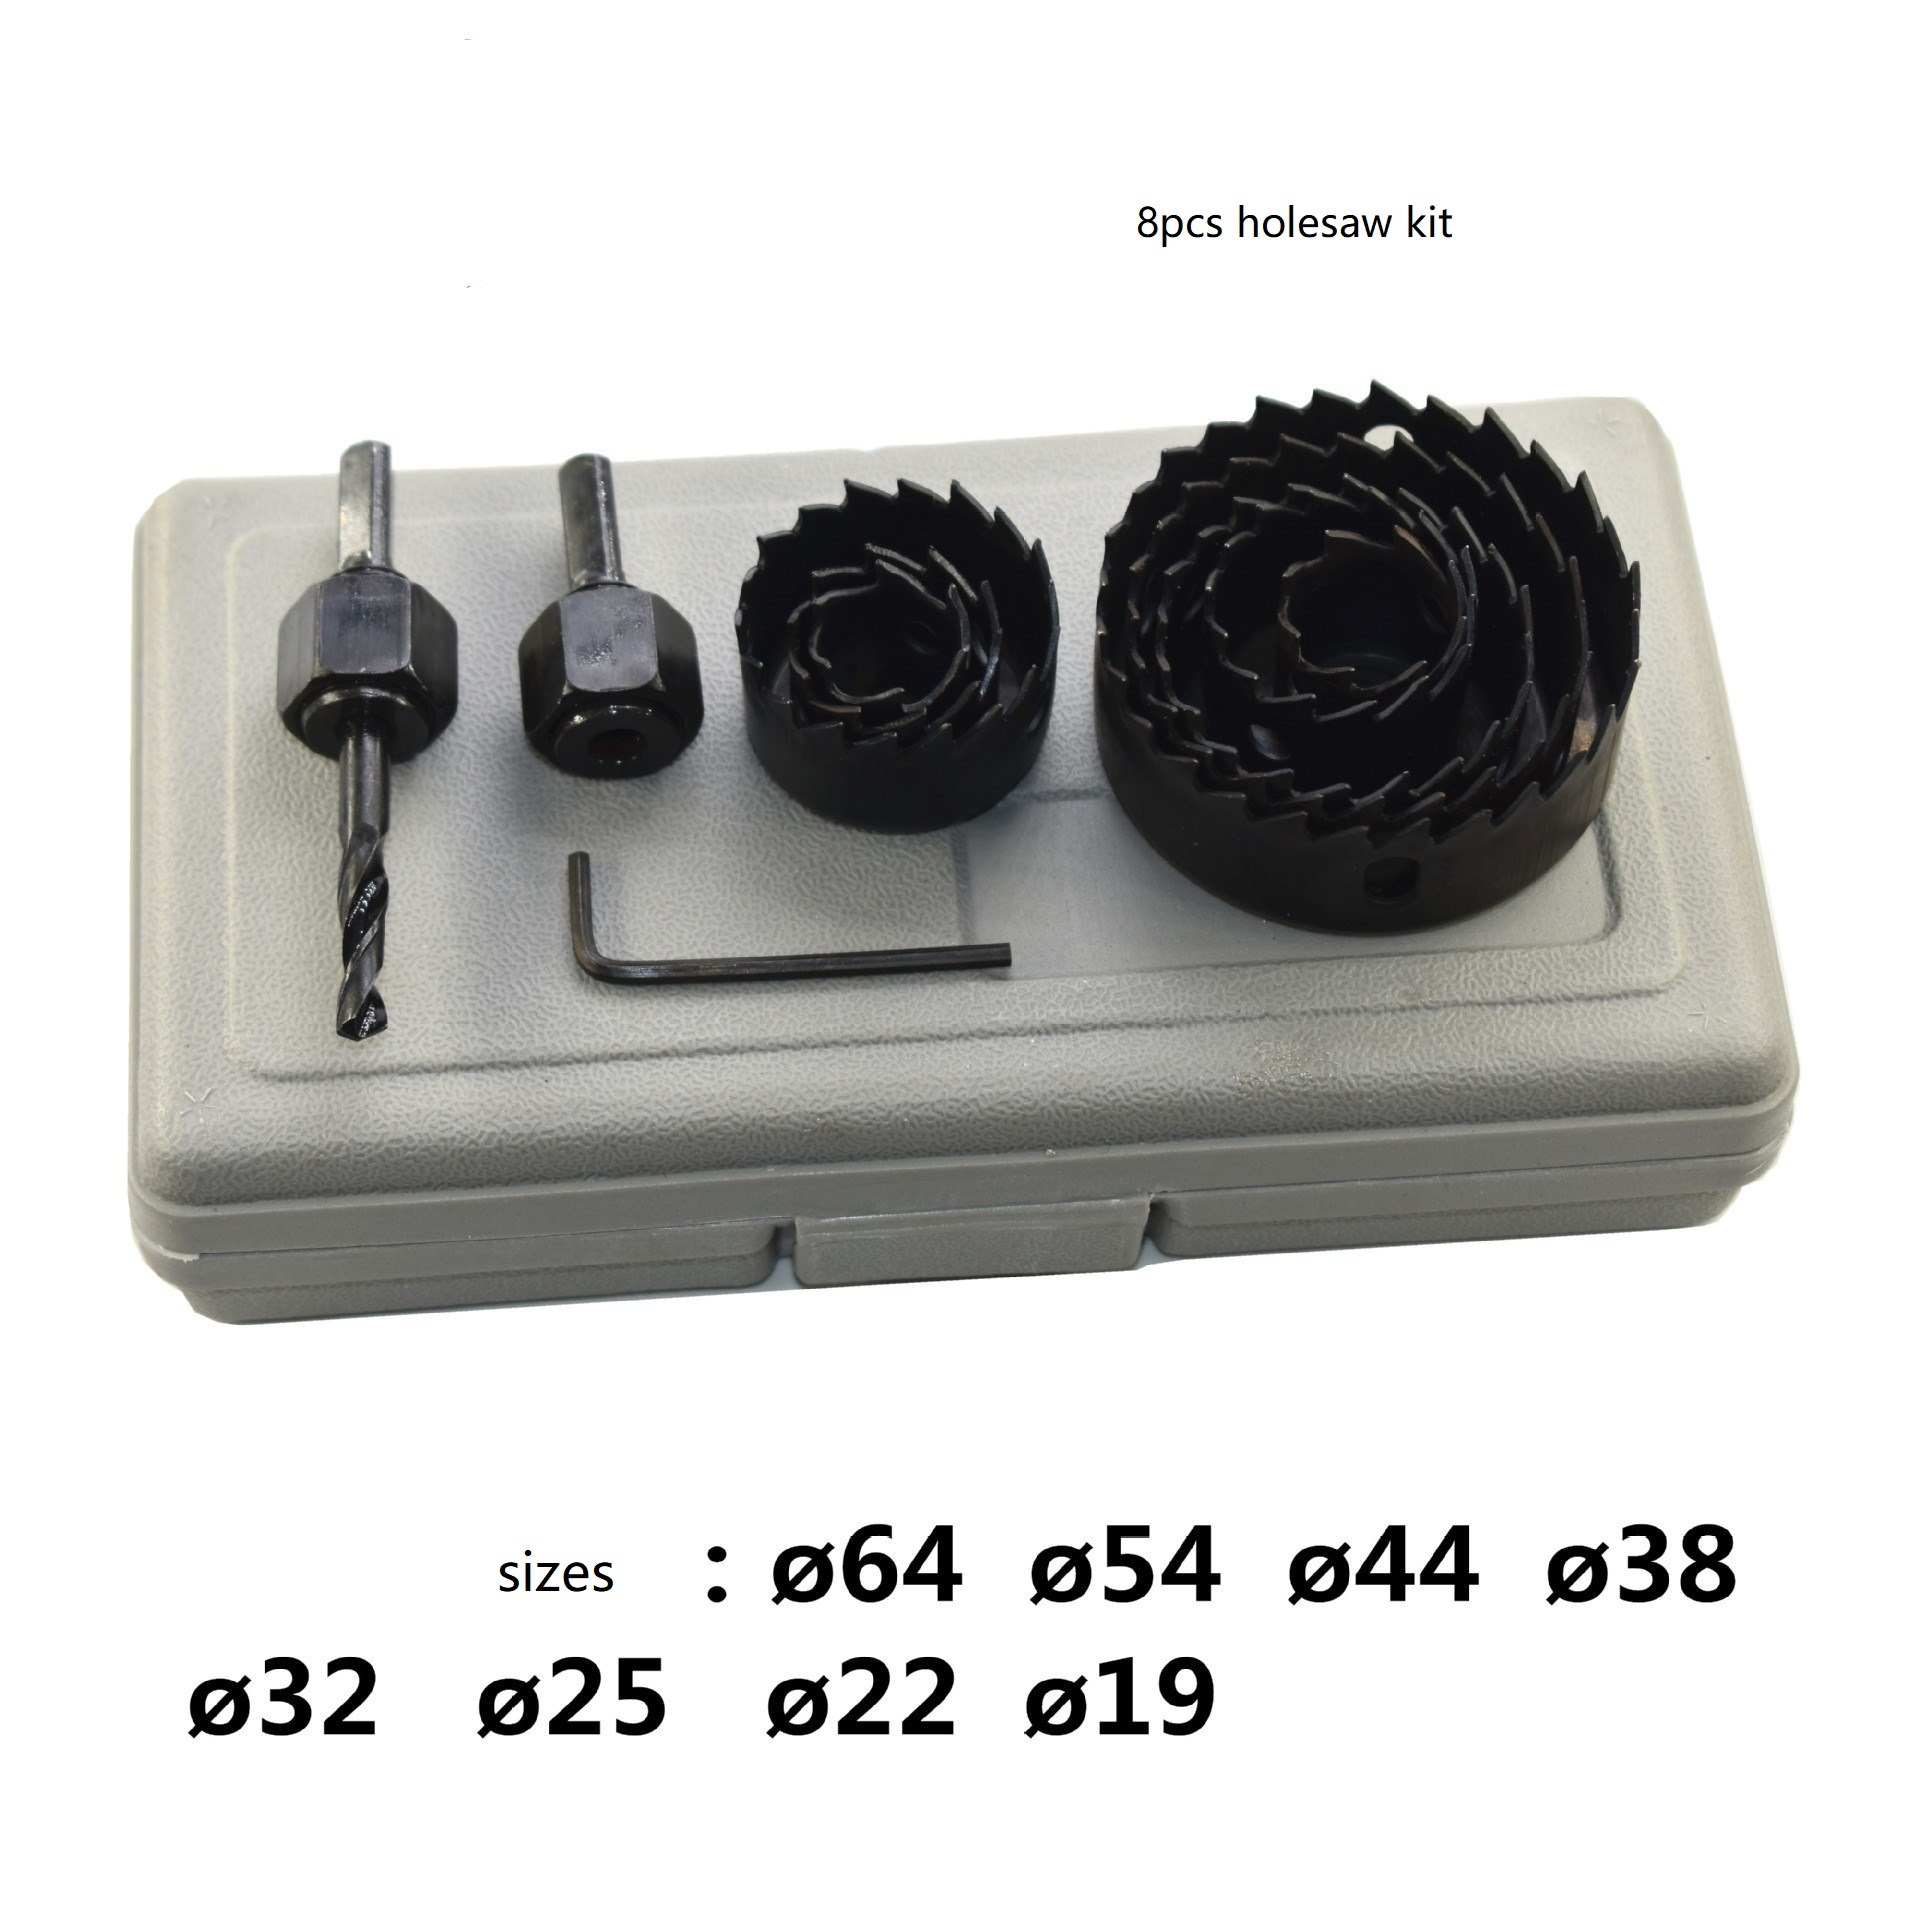 8PCS High Carbon Steel Wood Hole Saw Kit (SED-WHS-S8)